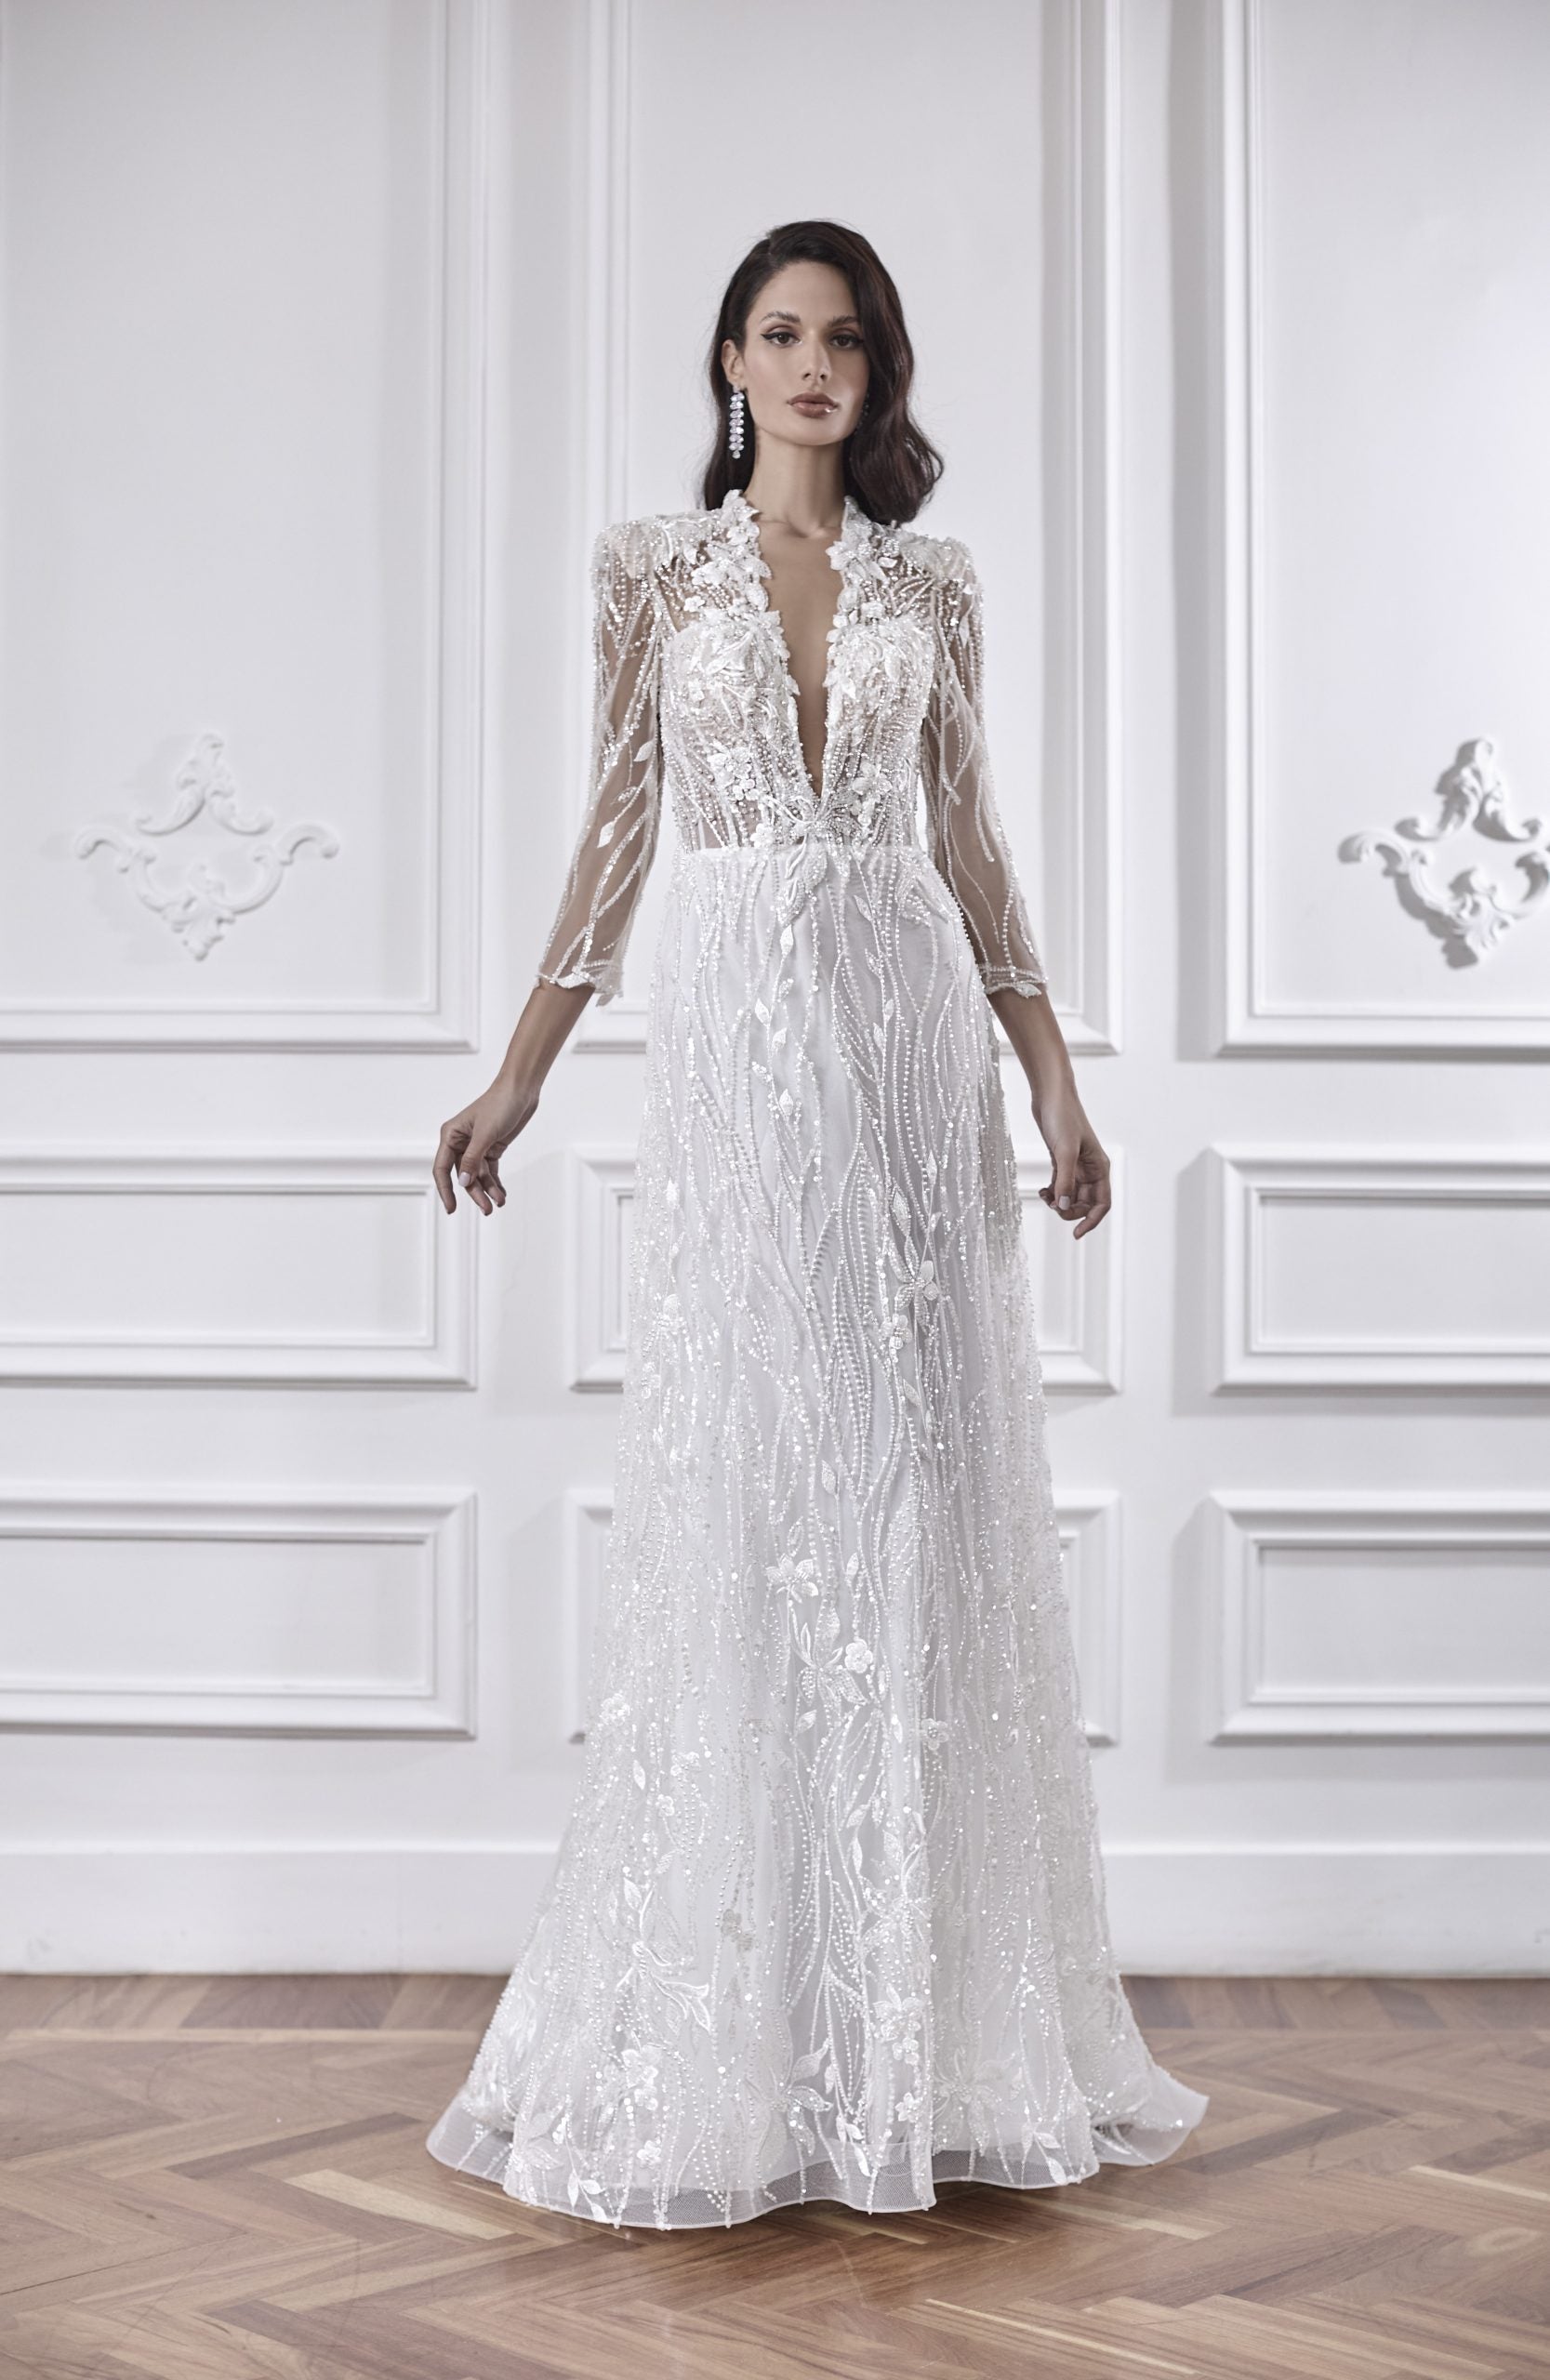 Beaded A-line Wedding Dress With Deep V-neckline And Illusion Long Sleeves by Maison Signore - Image 1